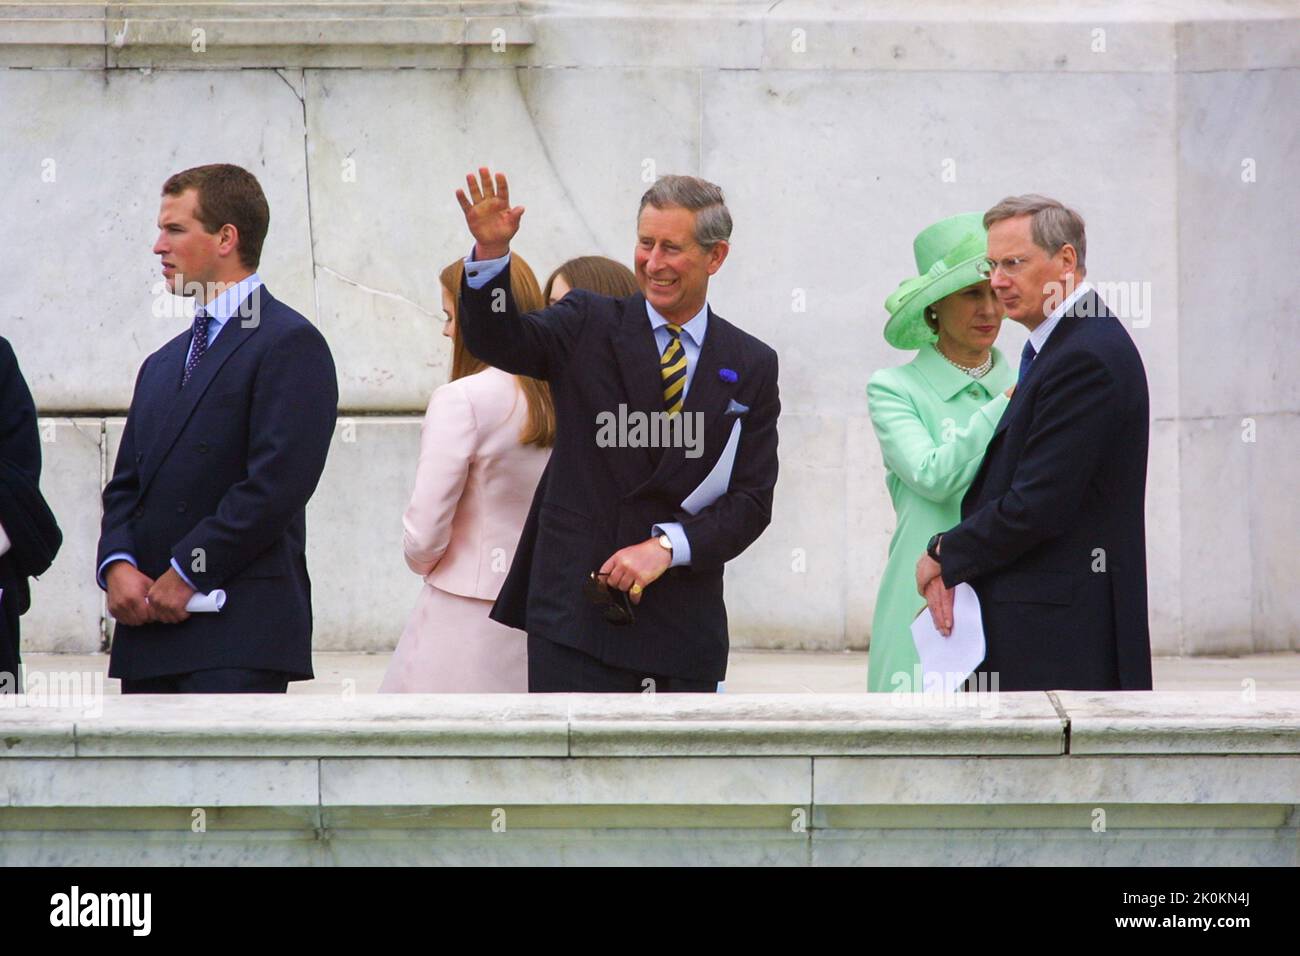 4th June 2002 - Prince Charles waving at crowds at Golden Jubilee of Queen Elizabeth II at Buckingham Palace in London Stock Photo